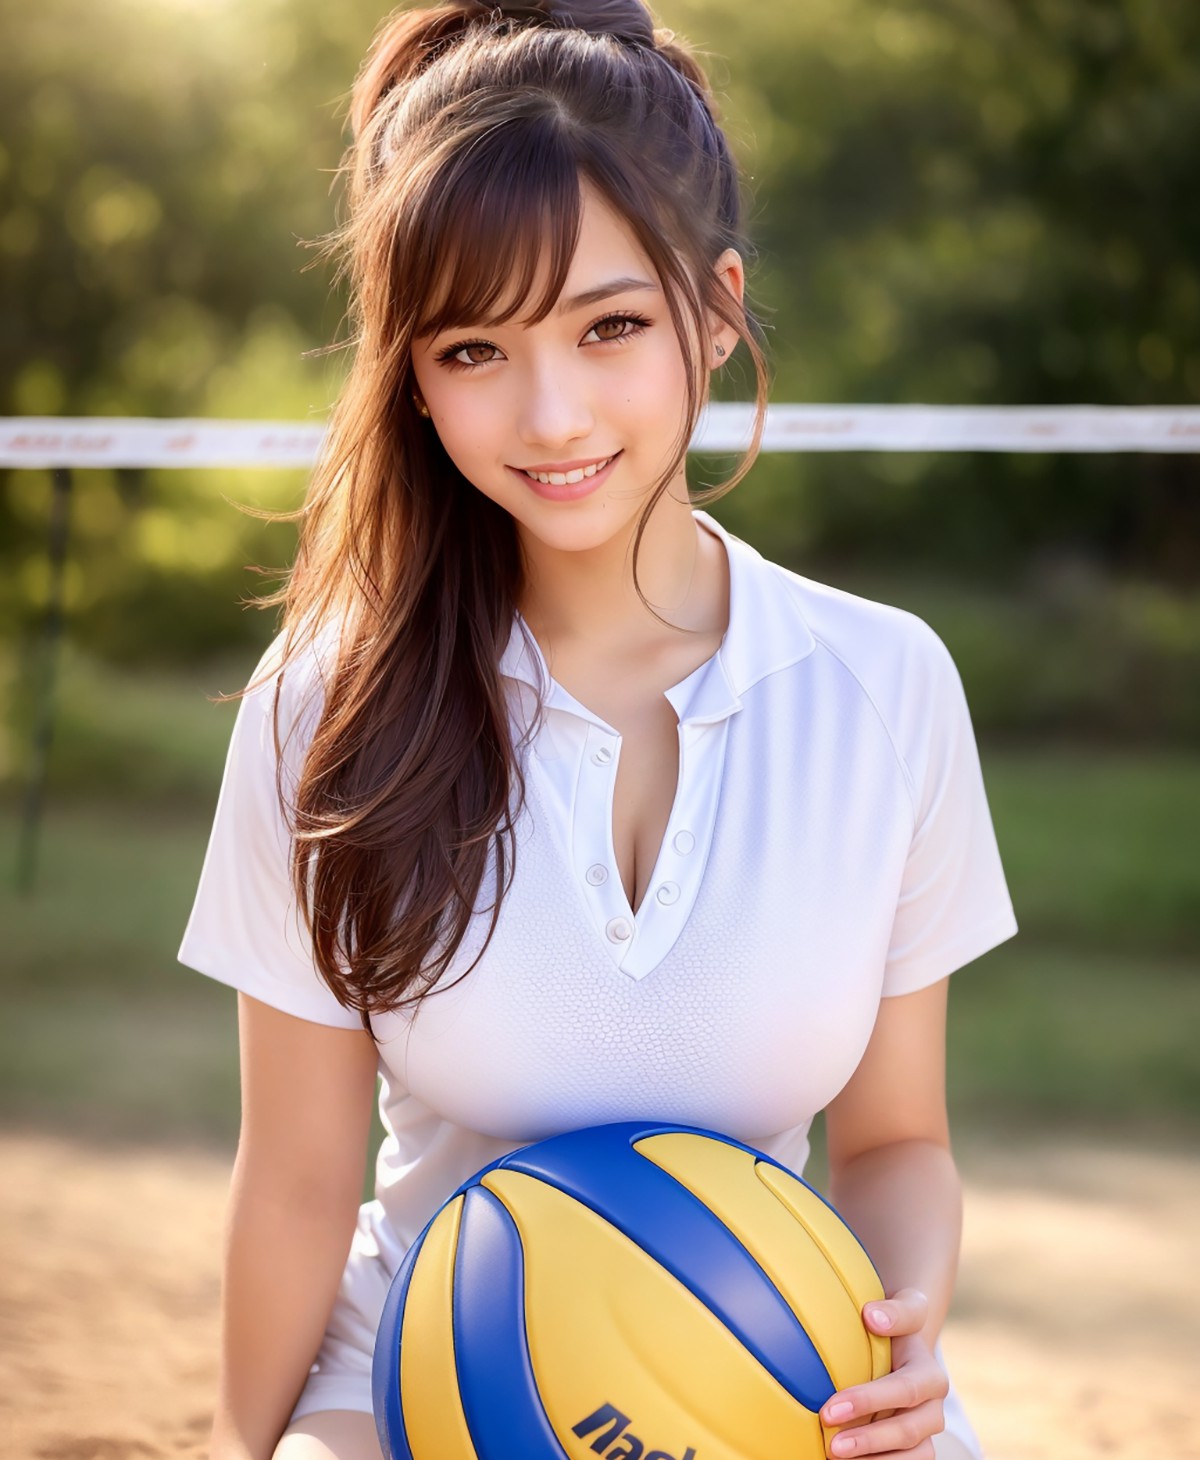 AIModel Vol 105 A Girl Playing Volleyball 0025 6984421869.jpg